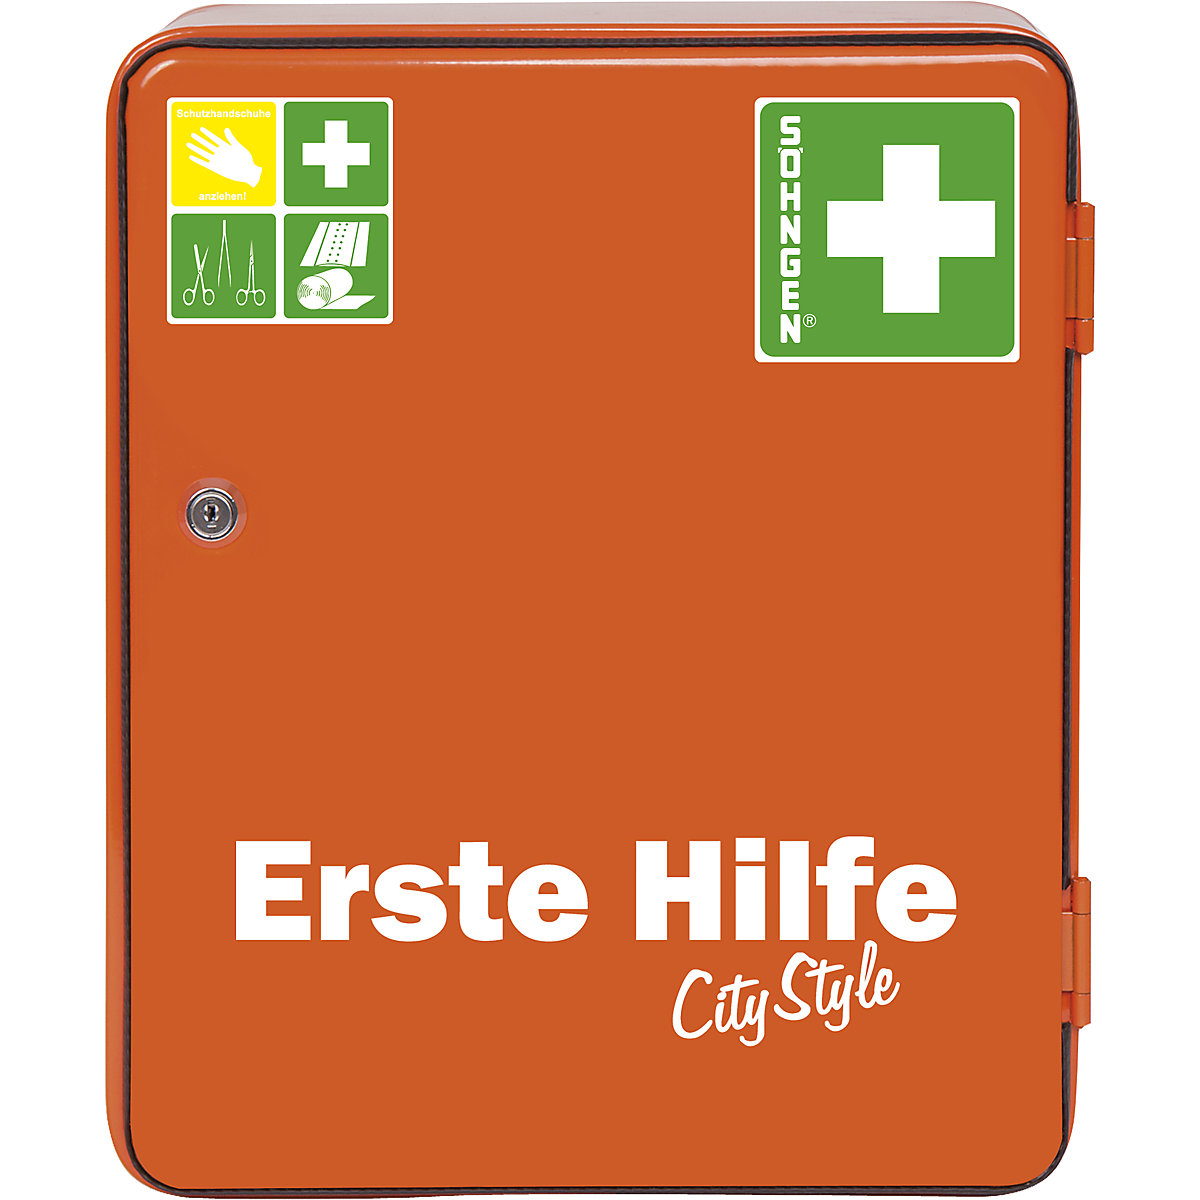 HEIDELBERG City Style first aid cabinet to DIN 13157 – SÖHNGEN